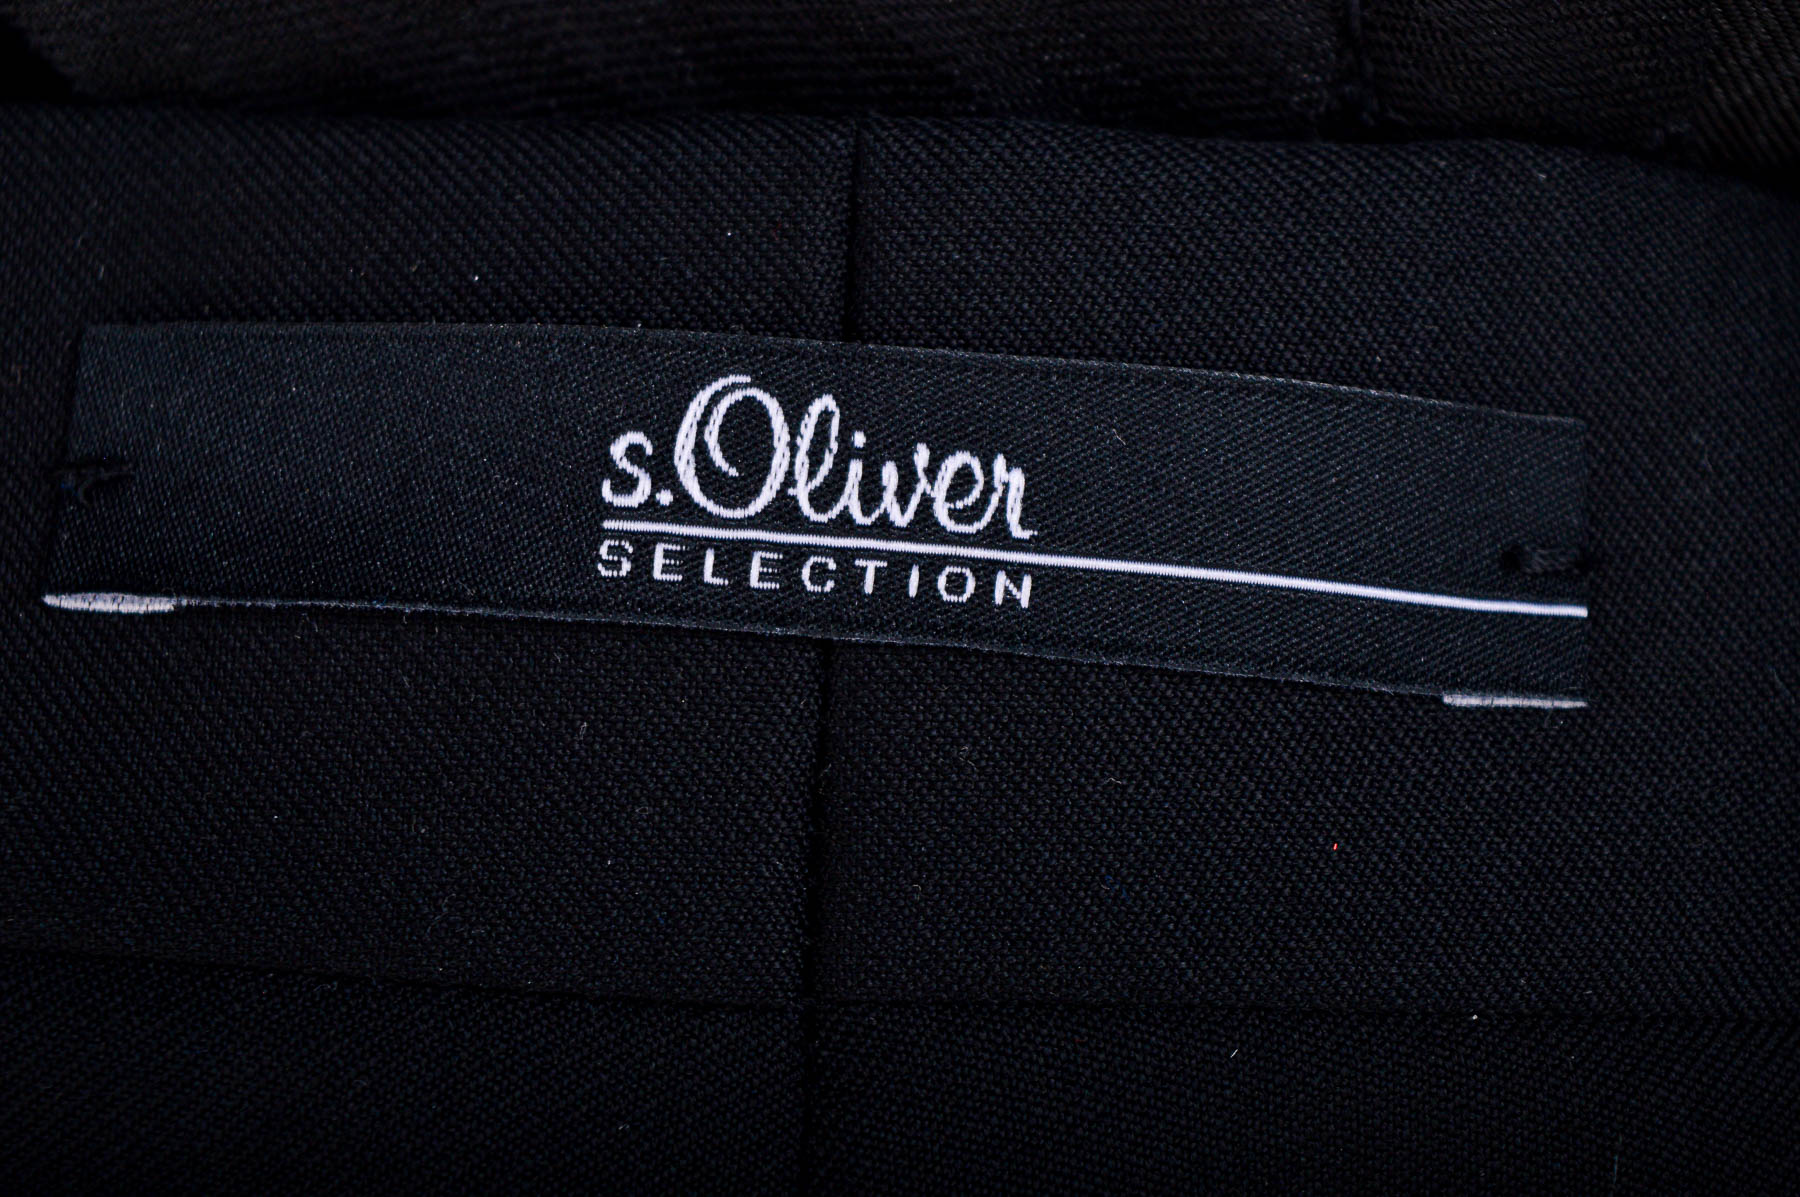 Men's trousers - S.Oliver - 2